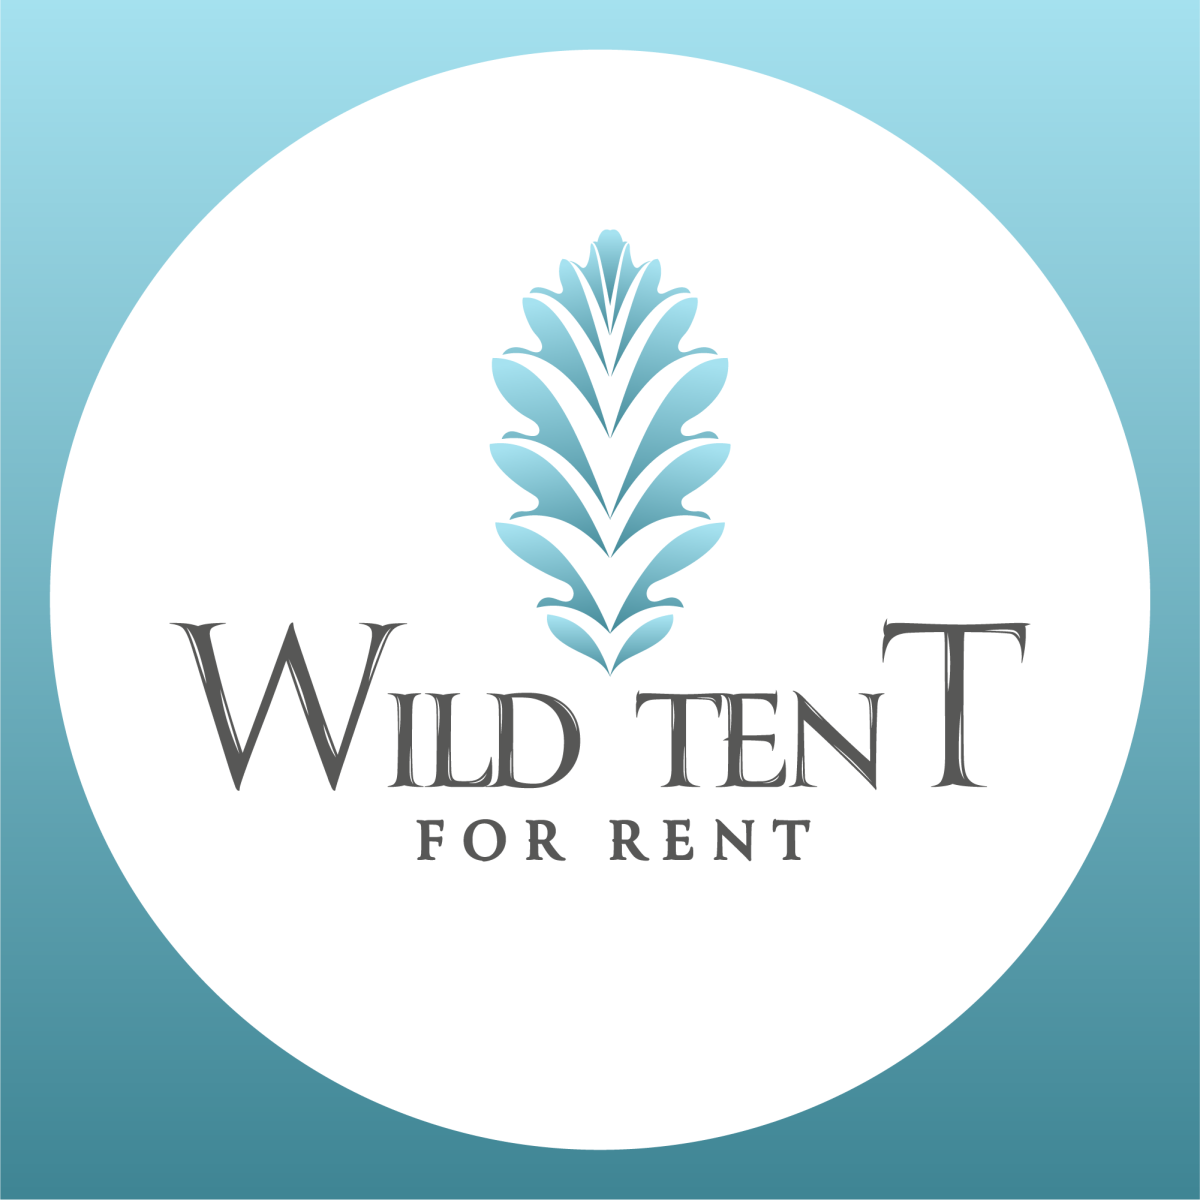 Wild Tent For Rent